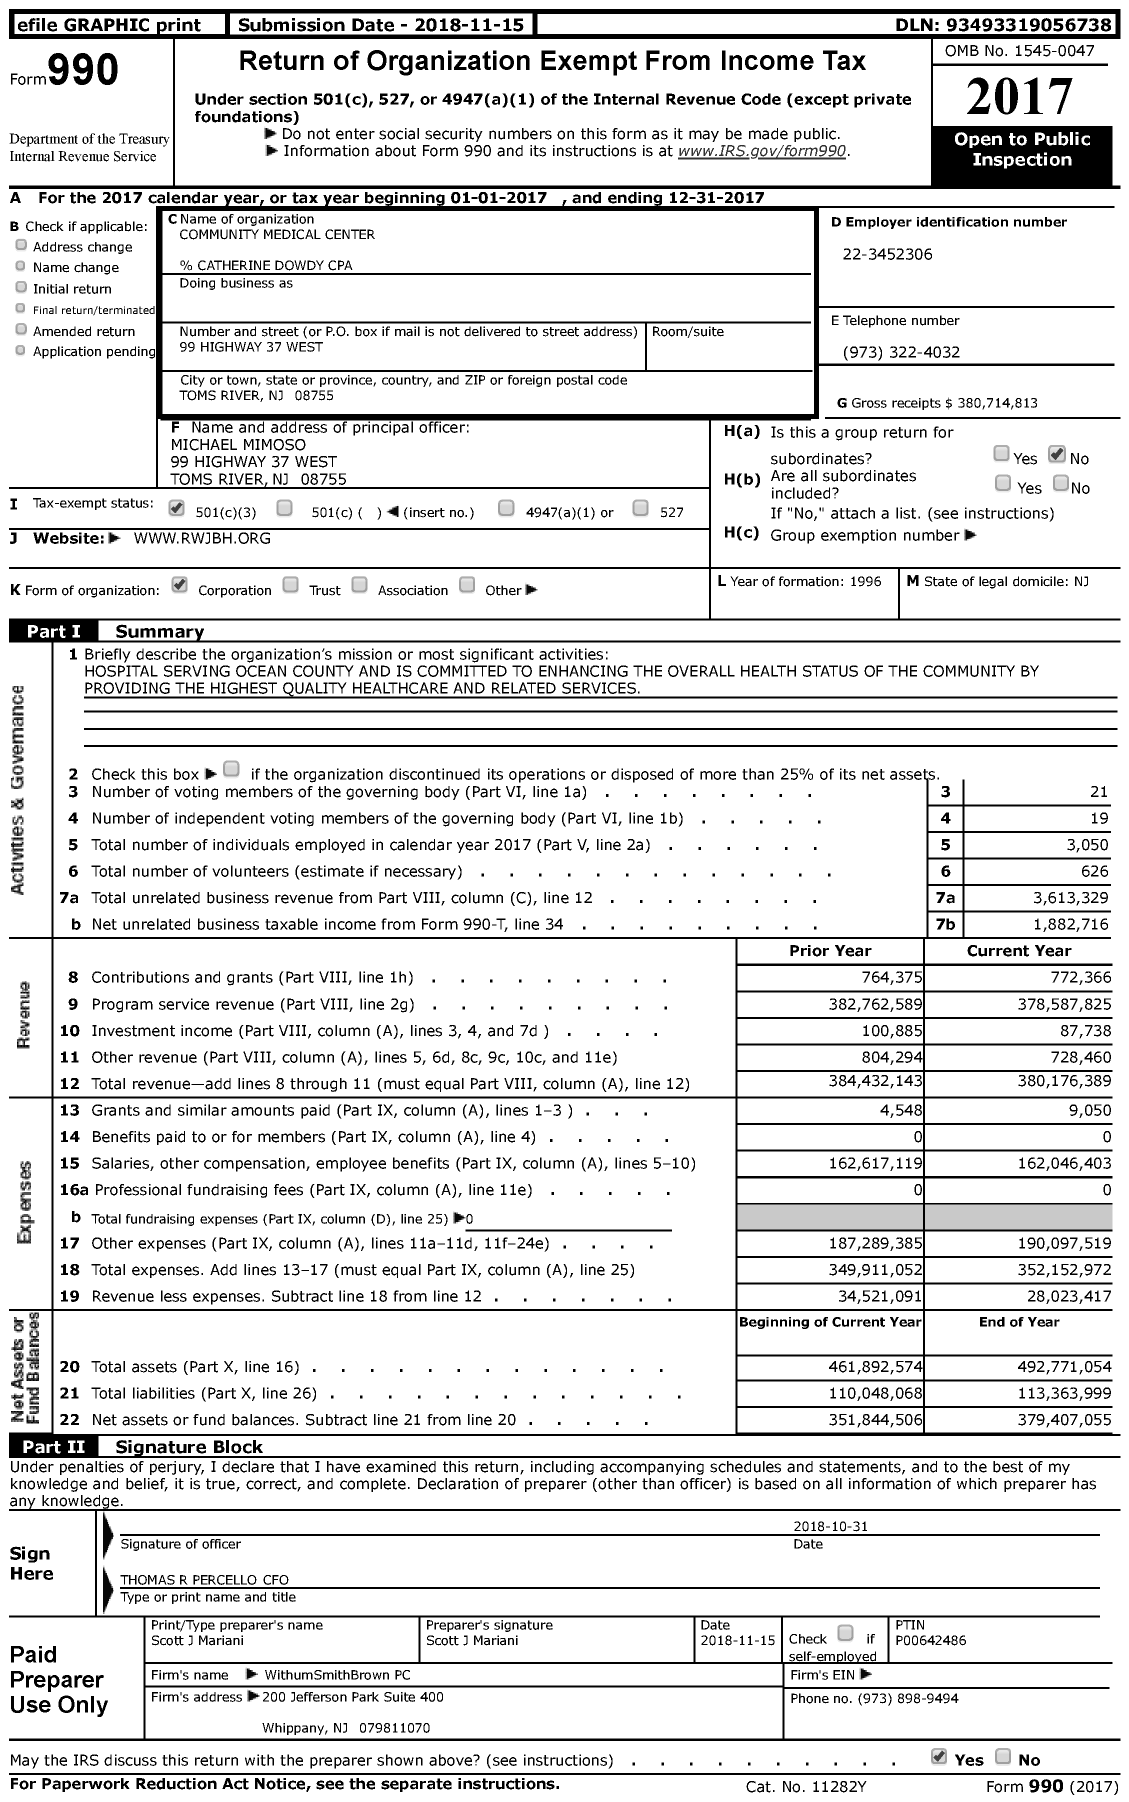 Image of first page of 2017 Form 990 for Community Medical Center (CMC)